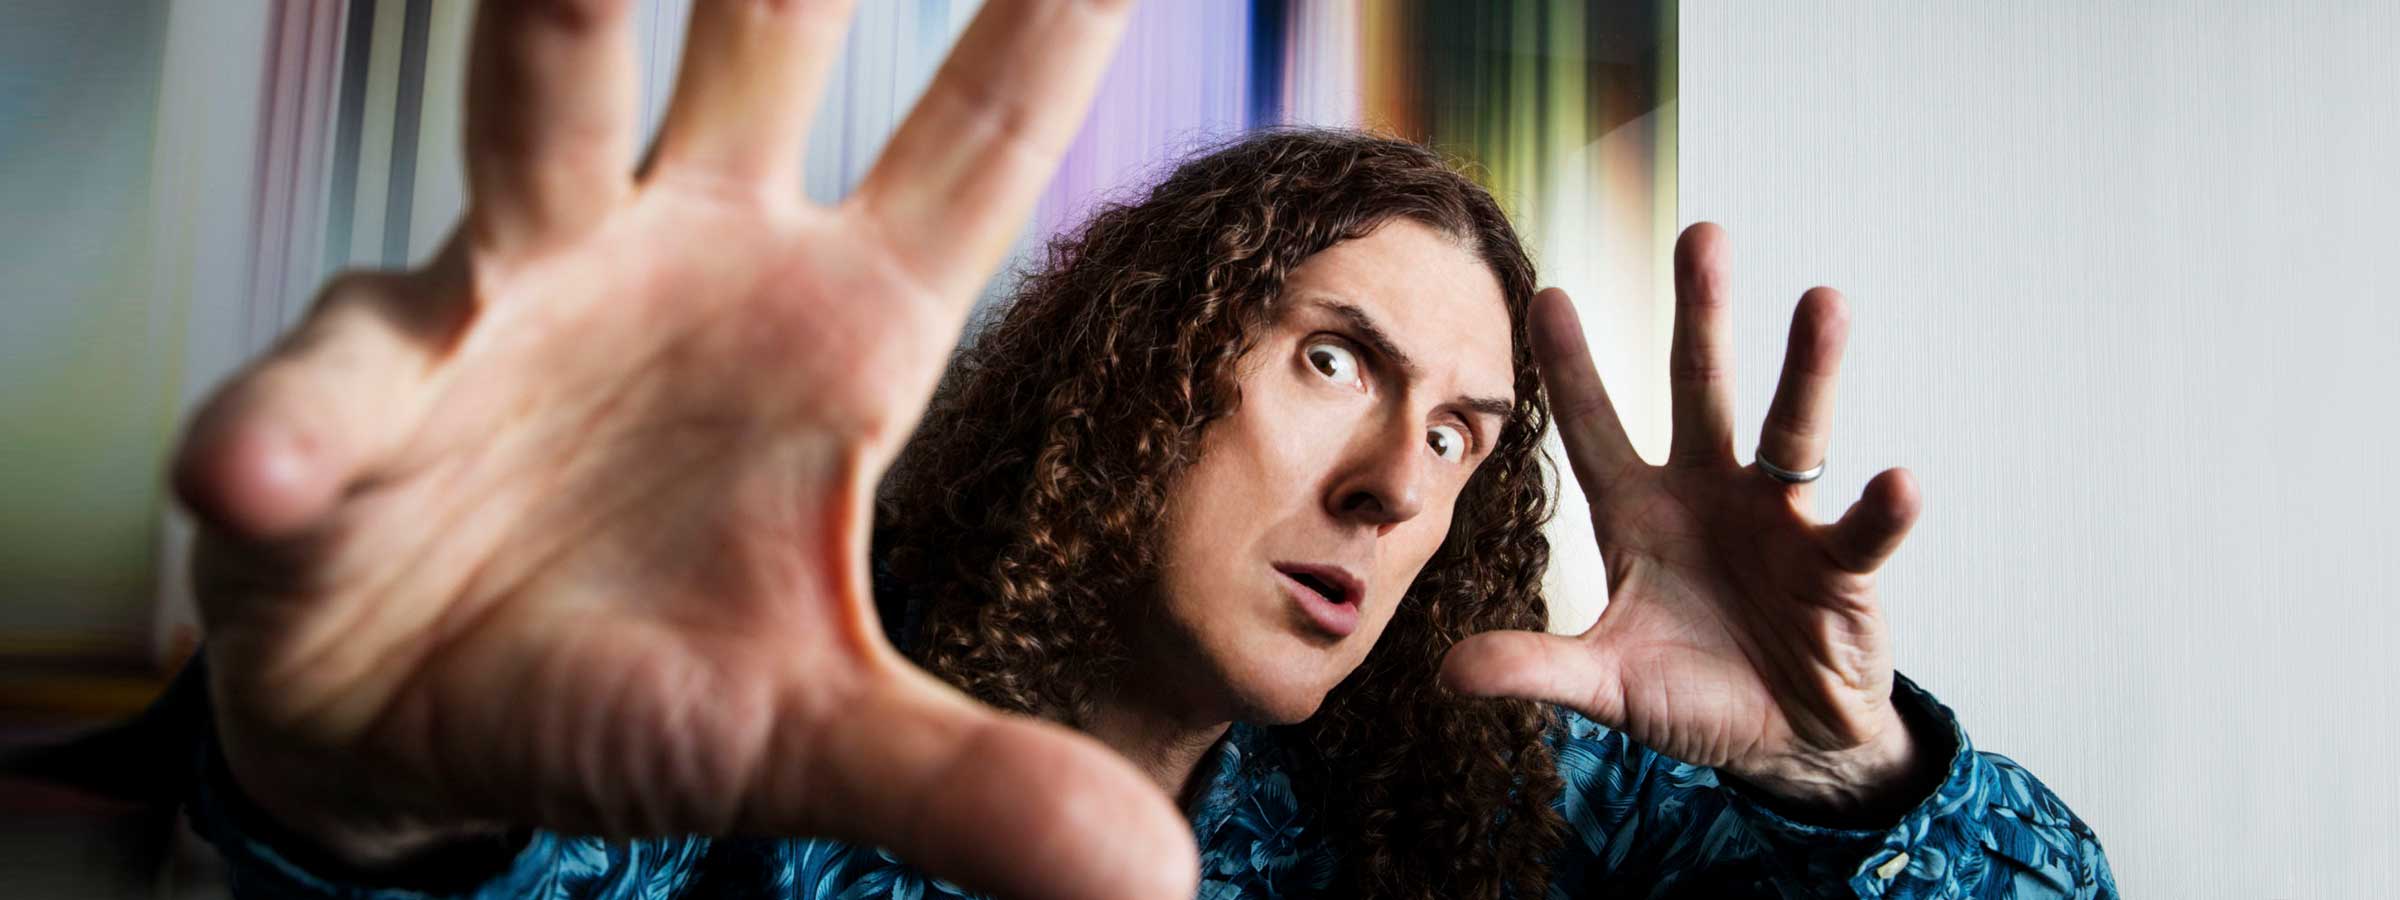 The Unfortunate Return of the Ridiculously Self-Indulgent, Ill-Advised Vanity Tour“WEIRD AL” YANKOVIC  presented by TEG Dainty